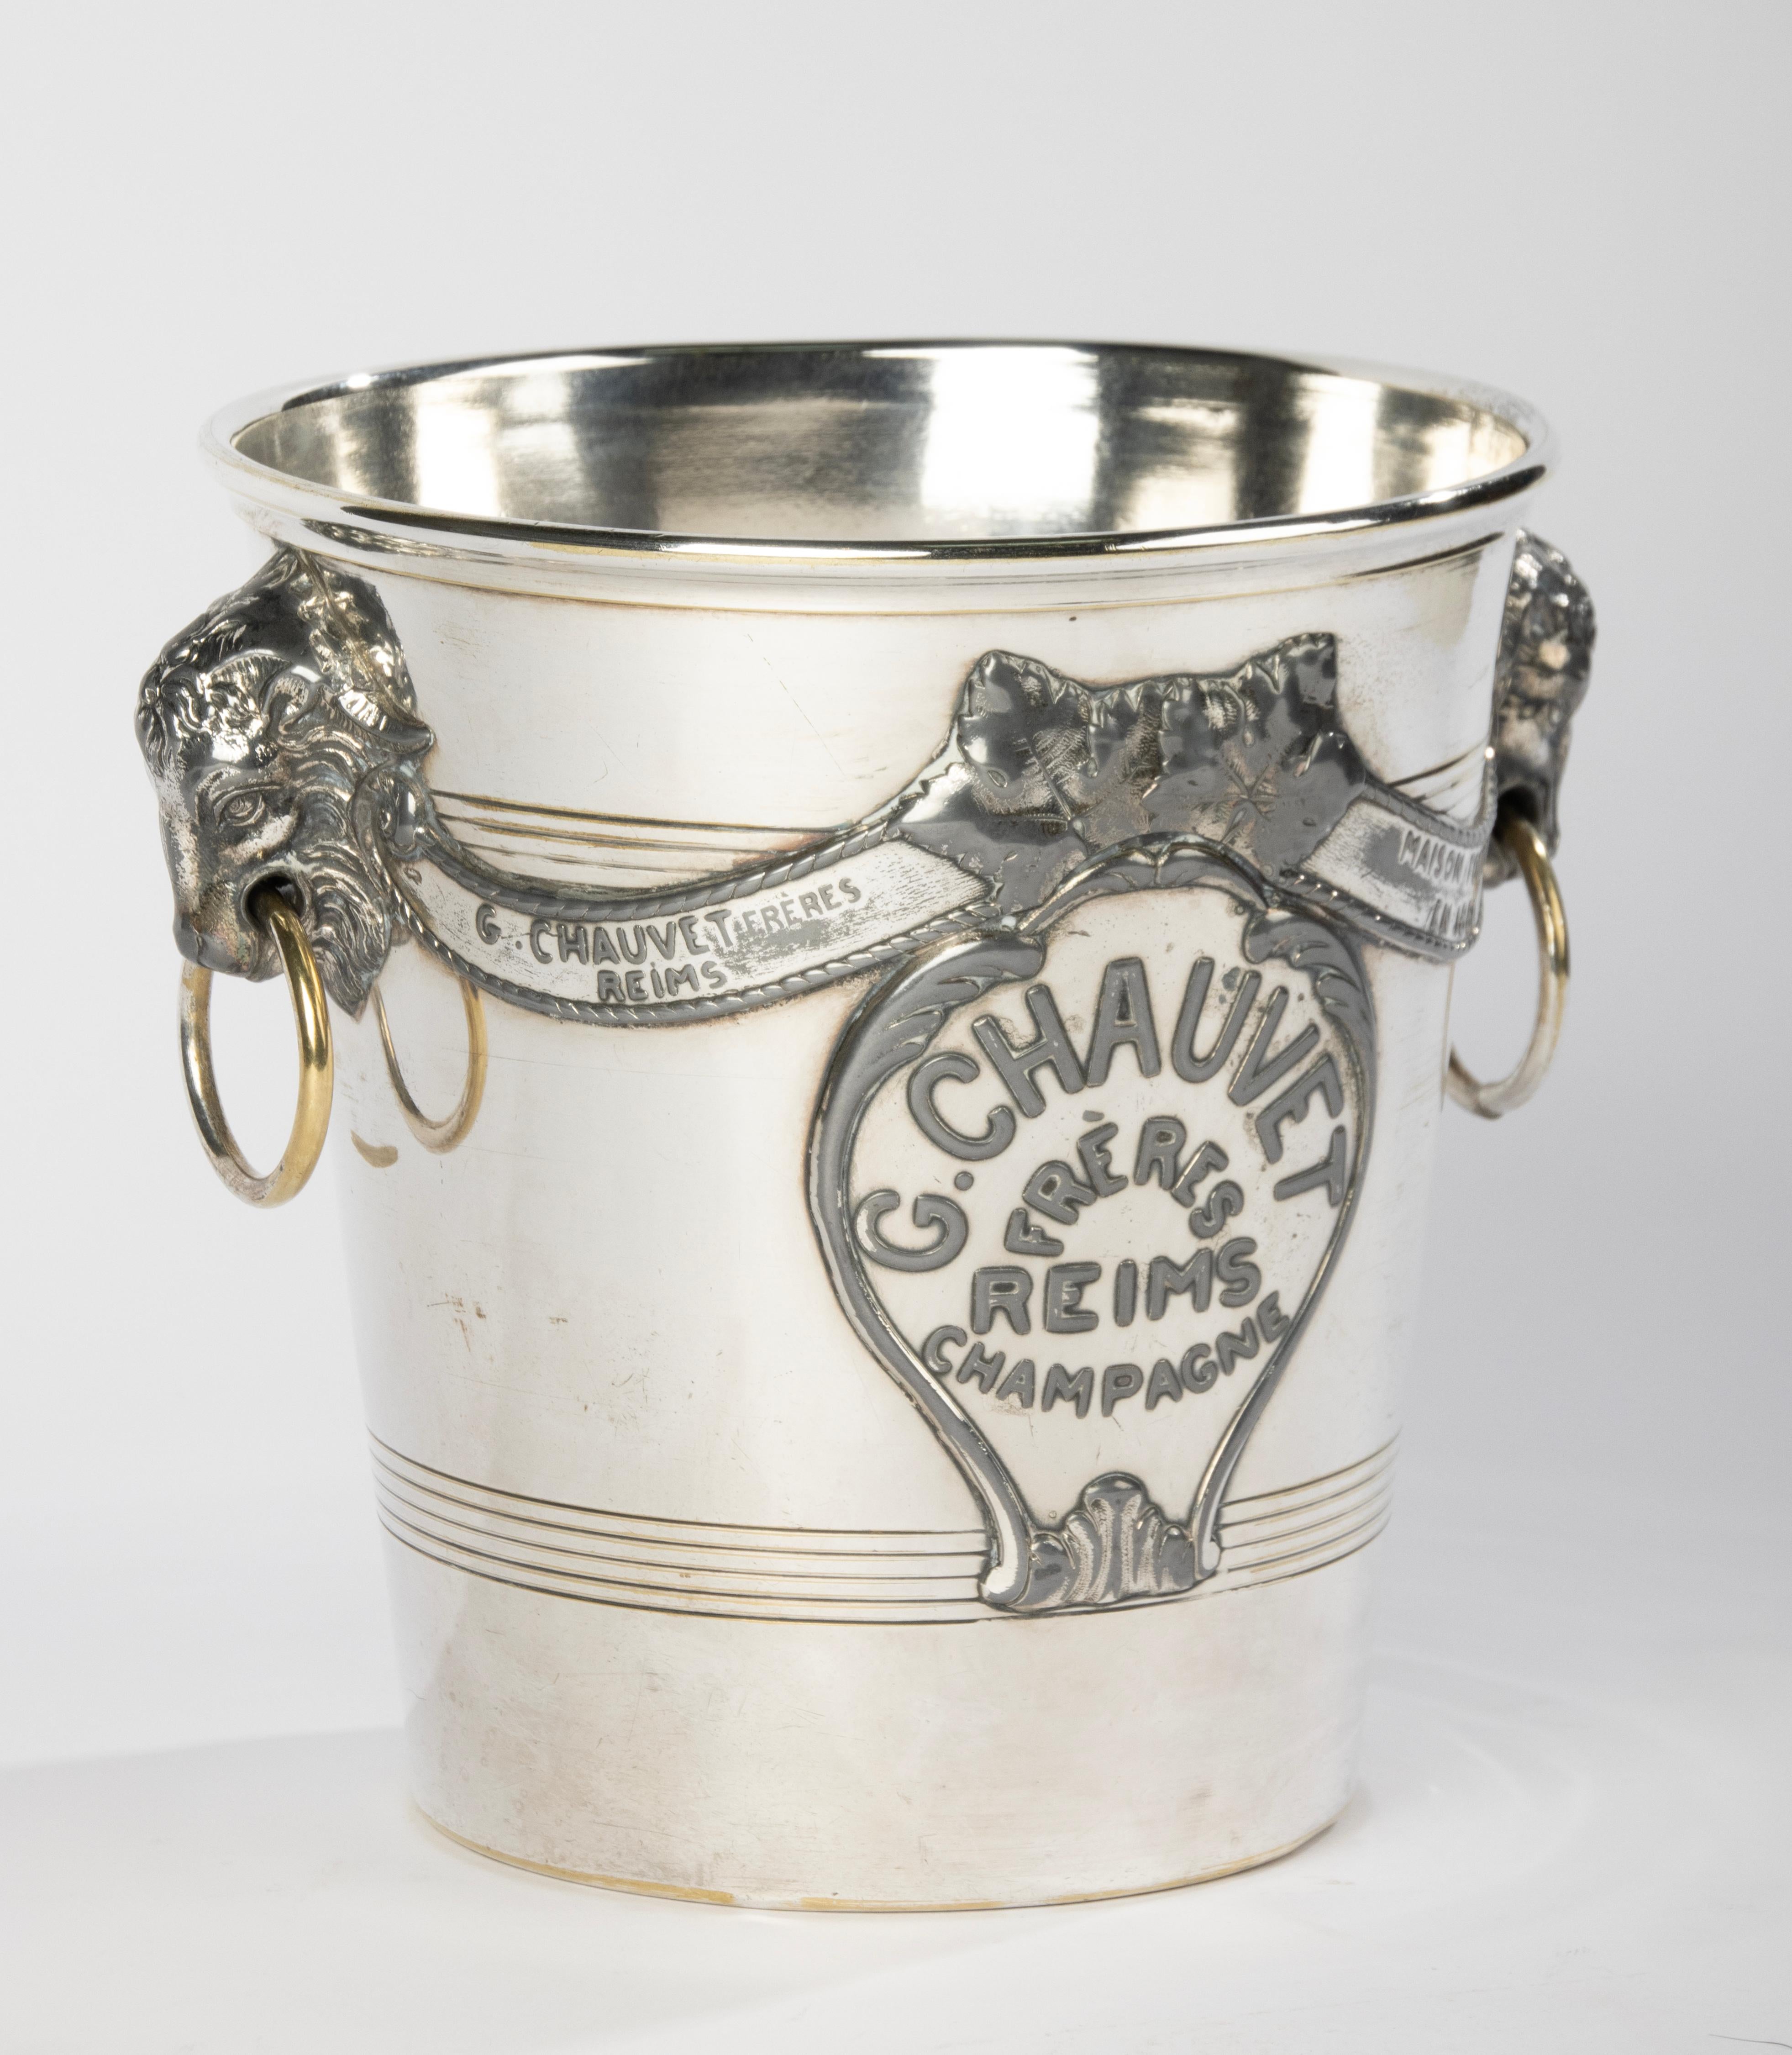 A beautiful antique silver-plated champagne cooler, made by the French brand Argit (Paris).
The champagne cooler is from the Champagne House G. Chauvet from the city of Reims.
The cooler is clearly in used condition: in some places the silver layer